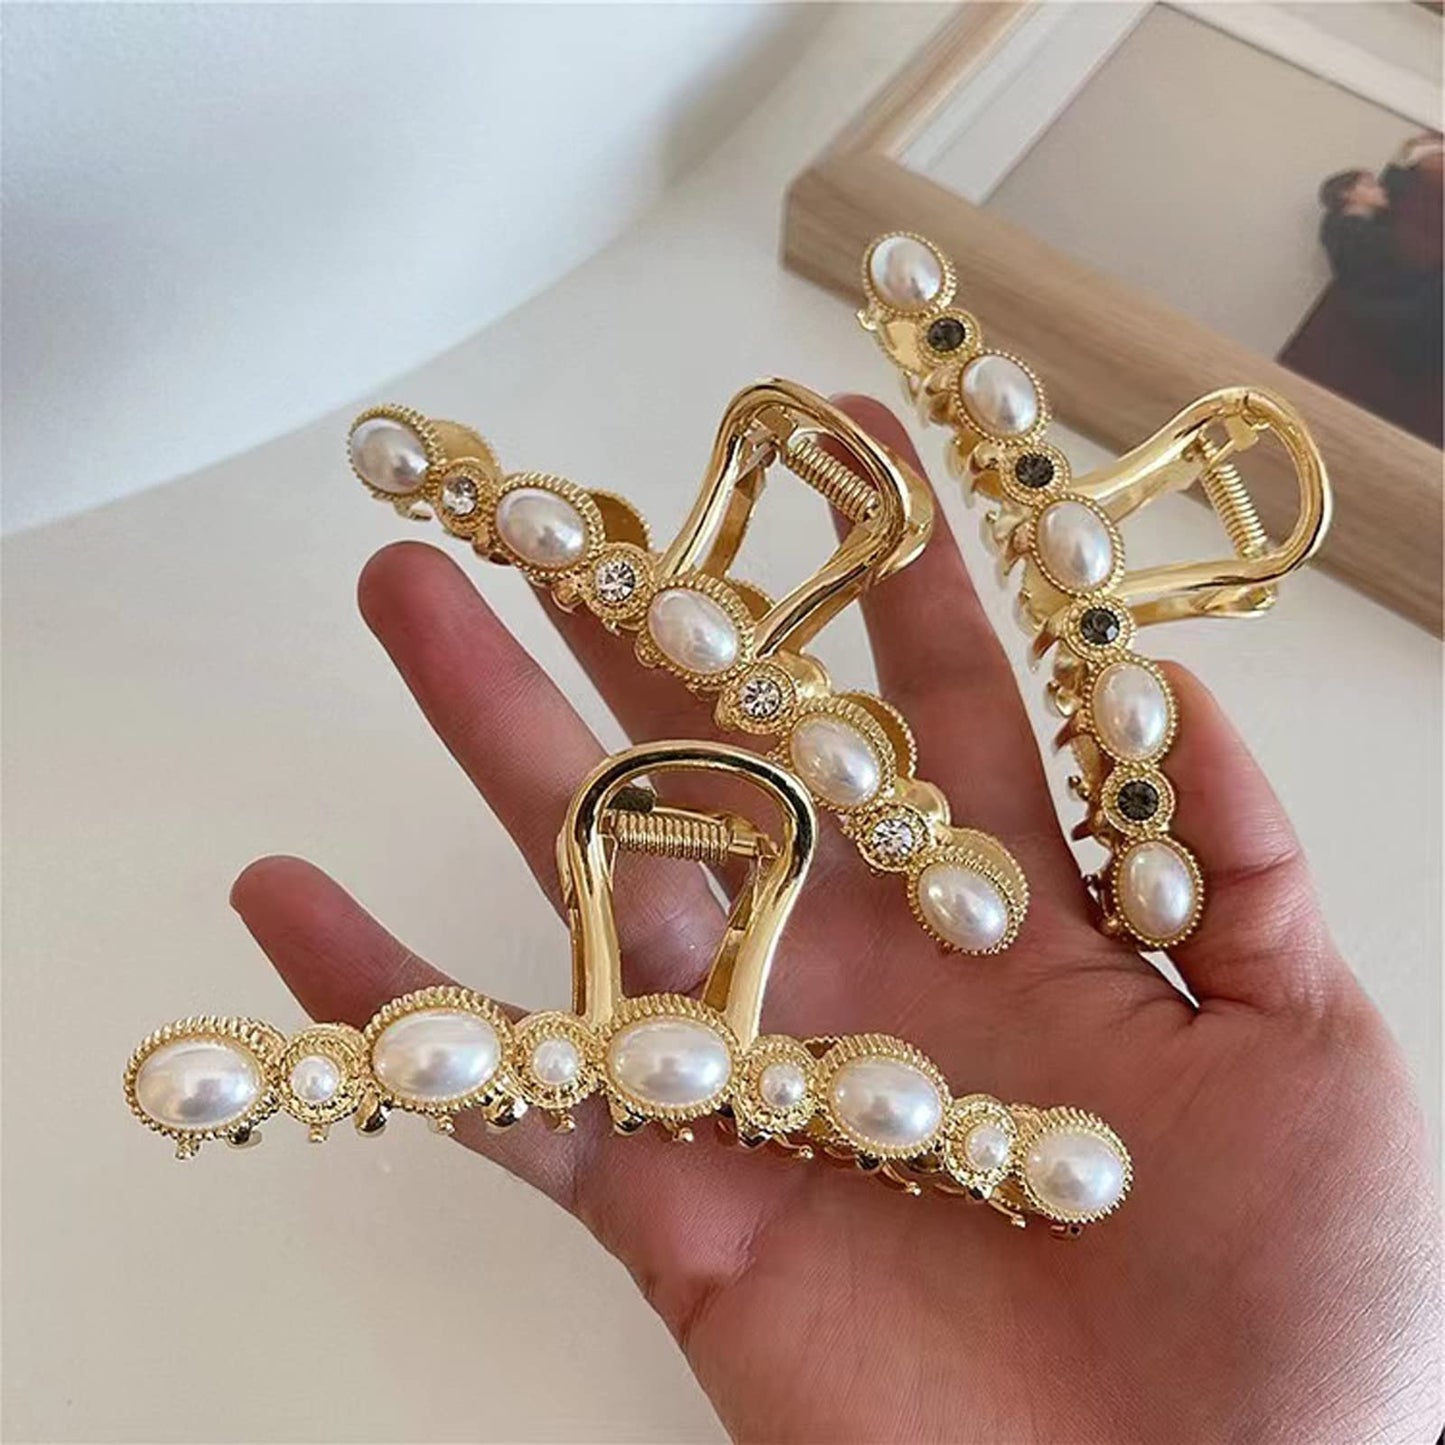 Agirlvct Pearl Hair Clips, Gold Hair Claw Clip Strong Hold, Big Fancy Hair Jaw Clips Nonslip with Rhinestone and Pearl,Summer Claw Clips Styling Birthday Gift for Women Girls Long Thick Hair(3 Pack)